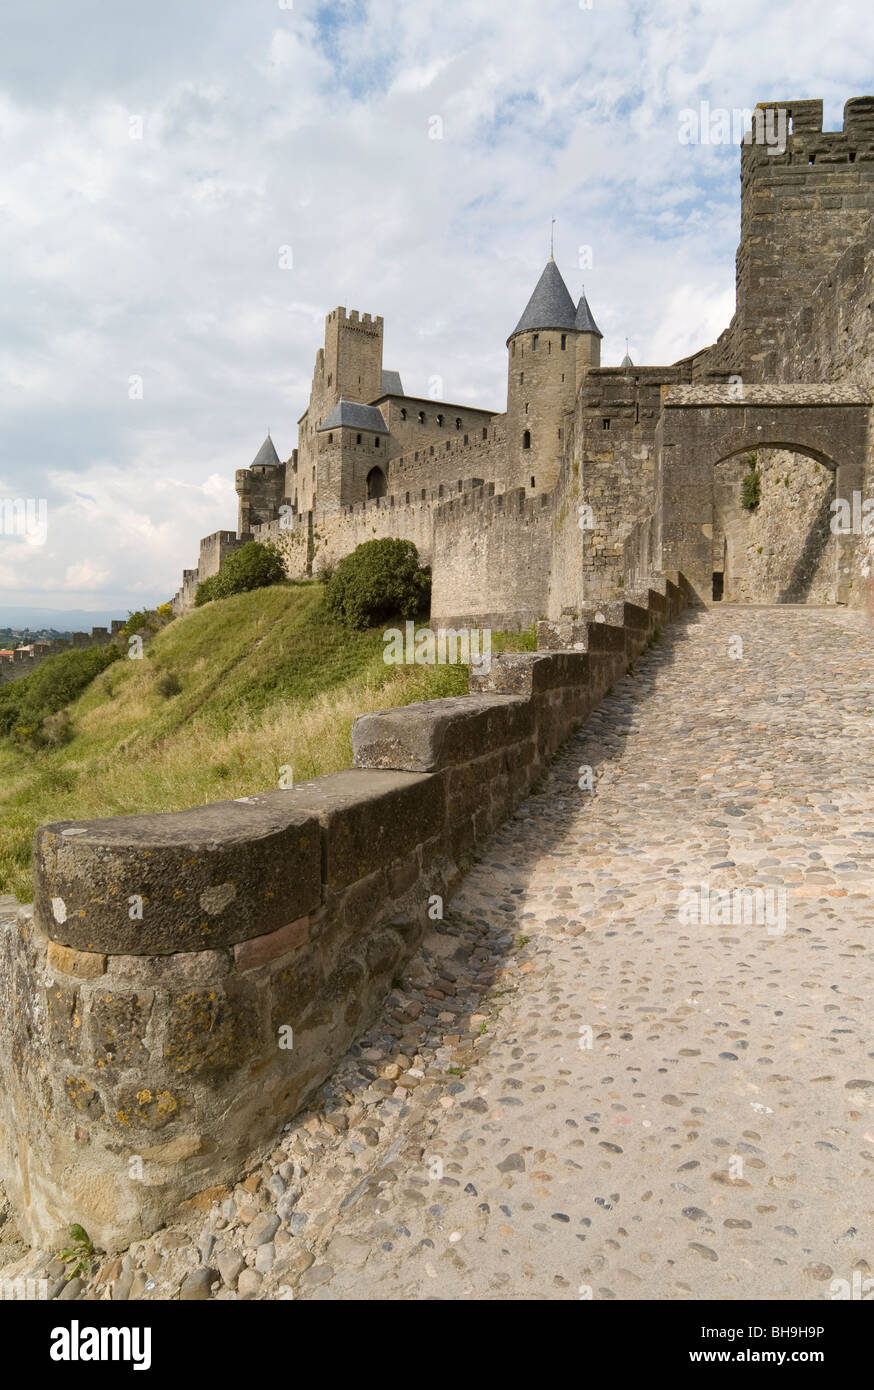 Causeway leading up to the citadel in Carcassonne, Aude, Occitanie, France Stock Photo